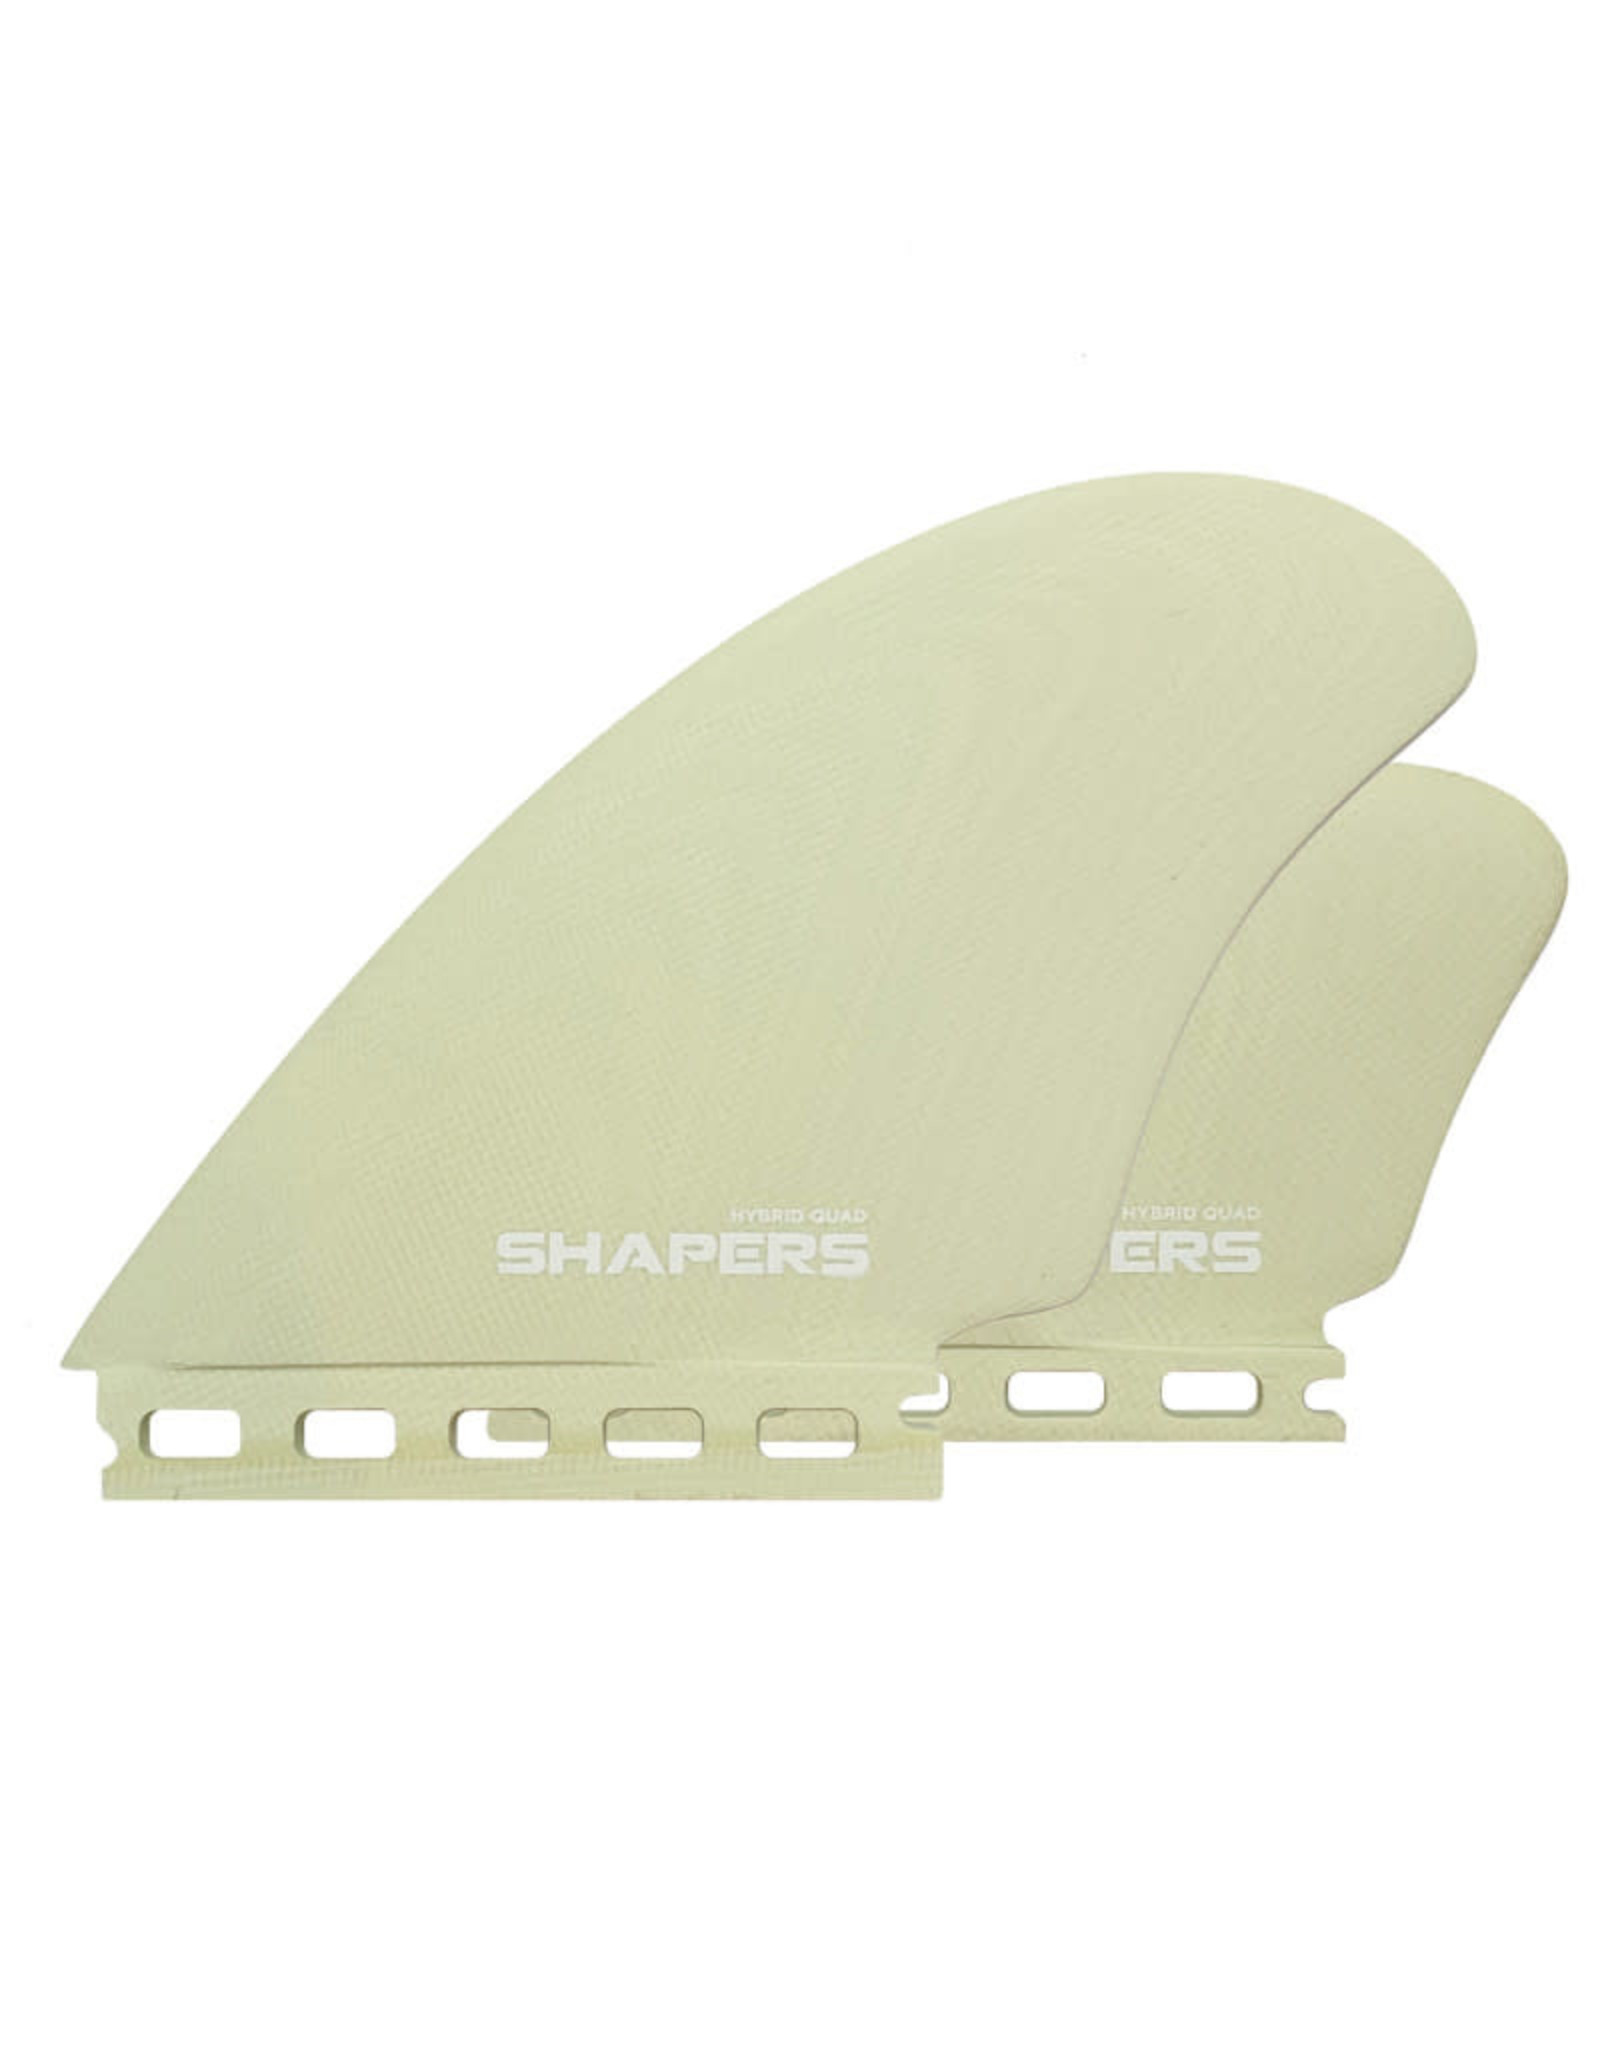 Shapers Shapers Hybride Keel Pro Glass Quad Fins Futures